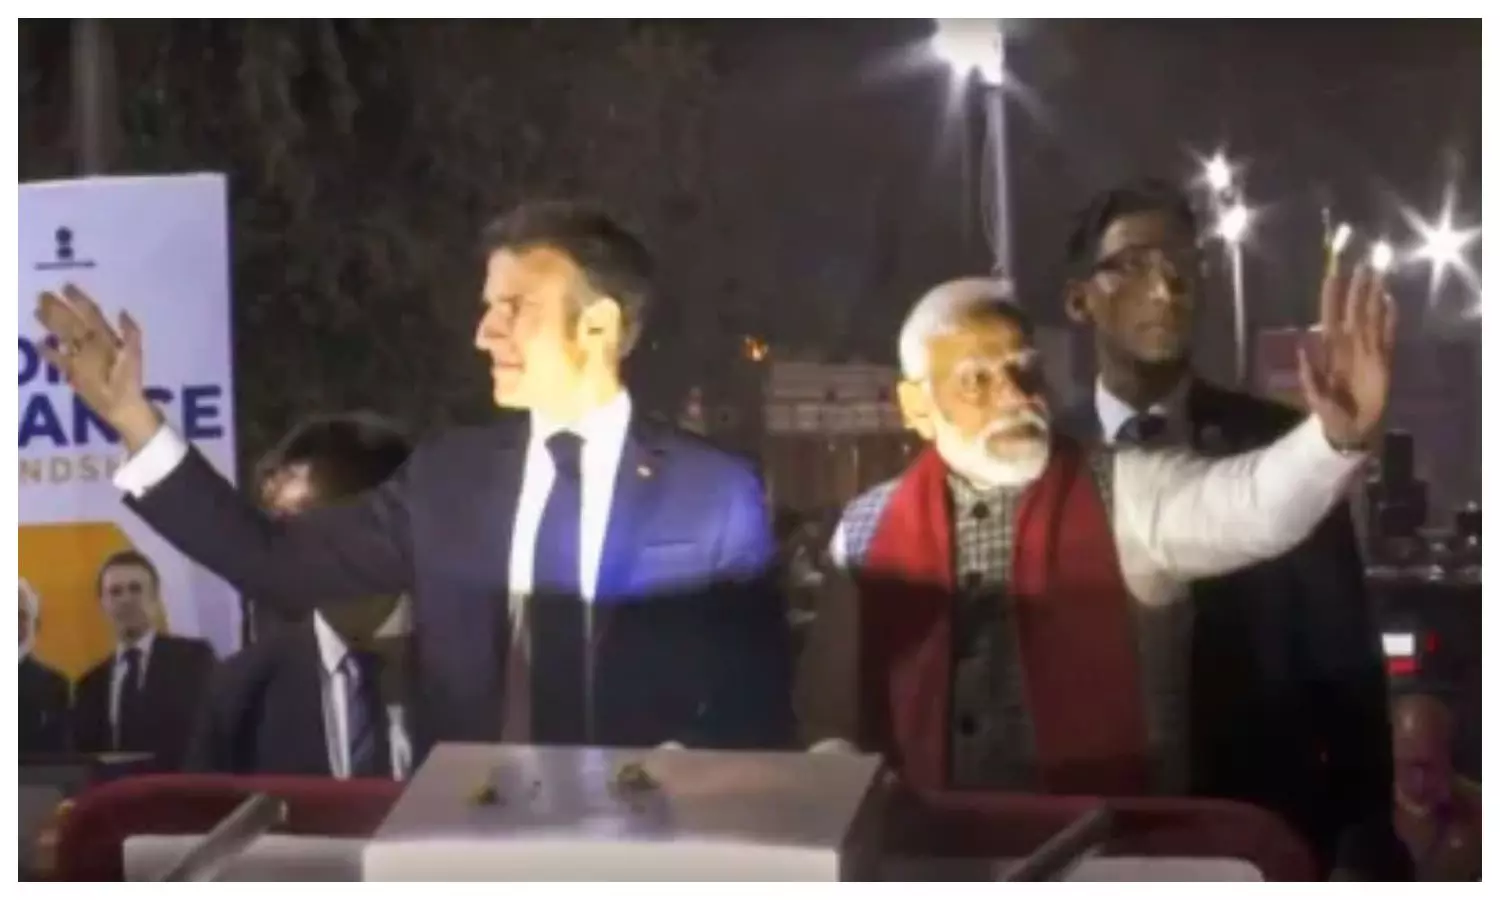 French President Macron arrives in Jaipur, will take part in road show